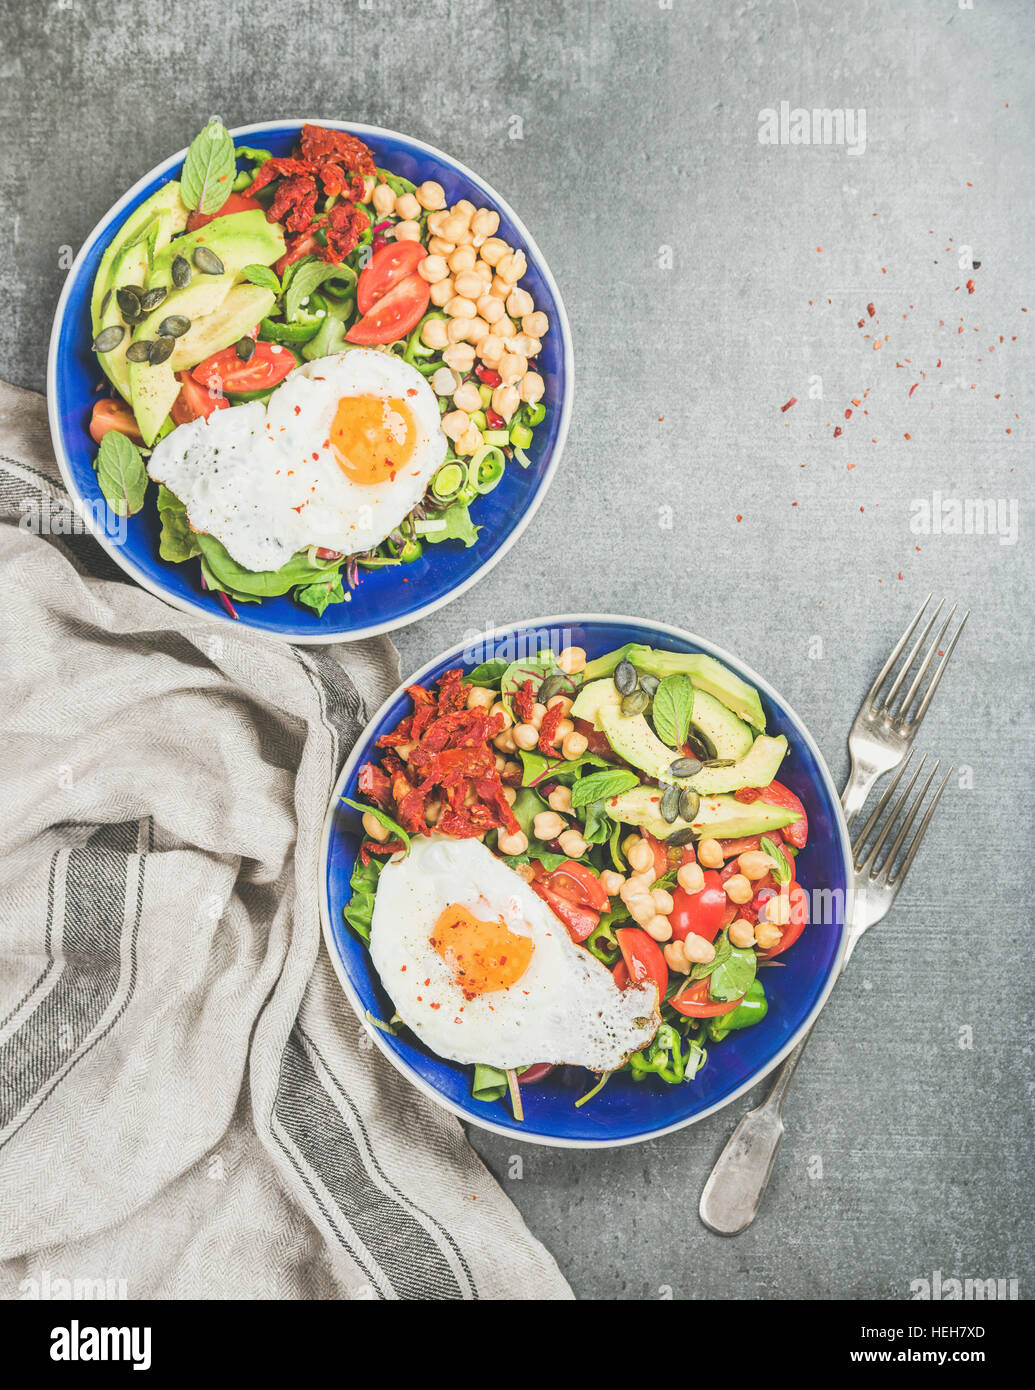 Healthy breakfast bowls with fried egg, chickpea sprouts, seeds, vegetables and greens over grey concrete background, top view, copy space. Clean eati Stock Photo